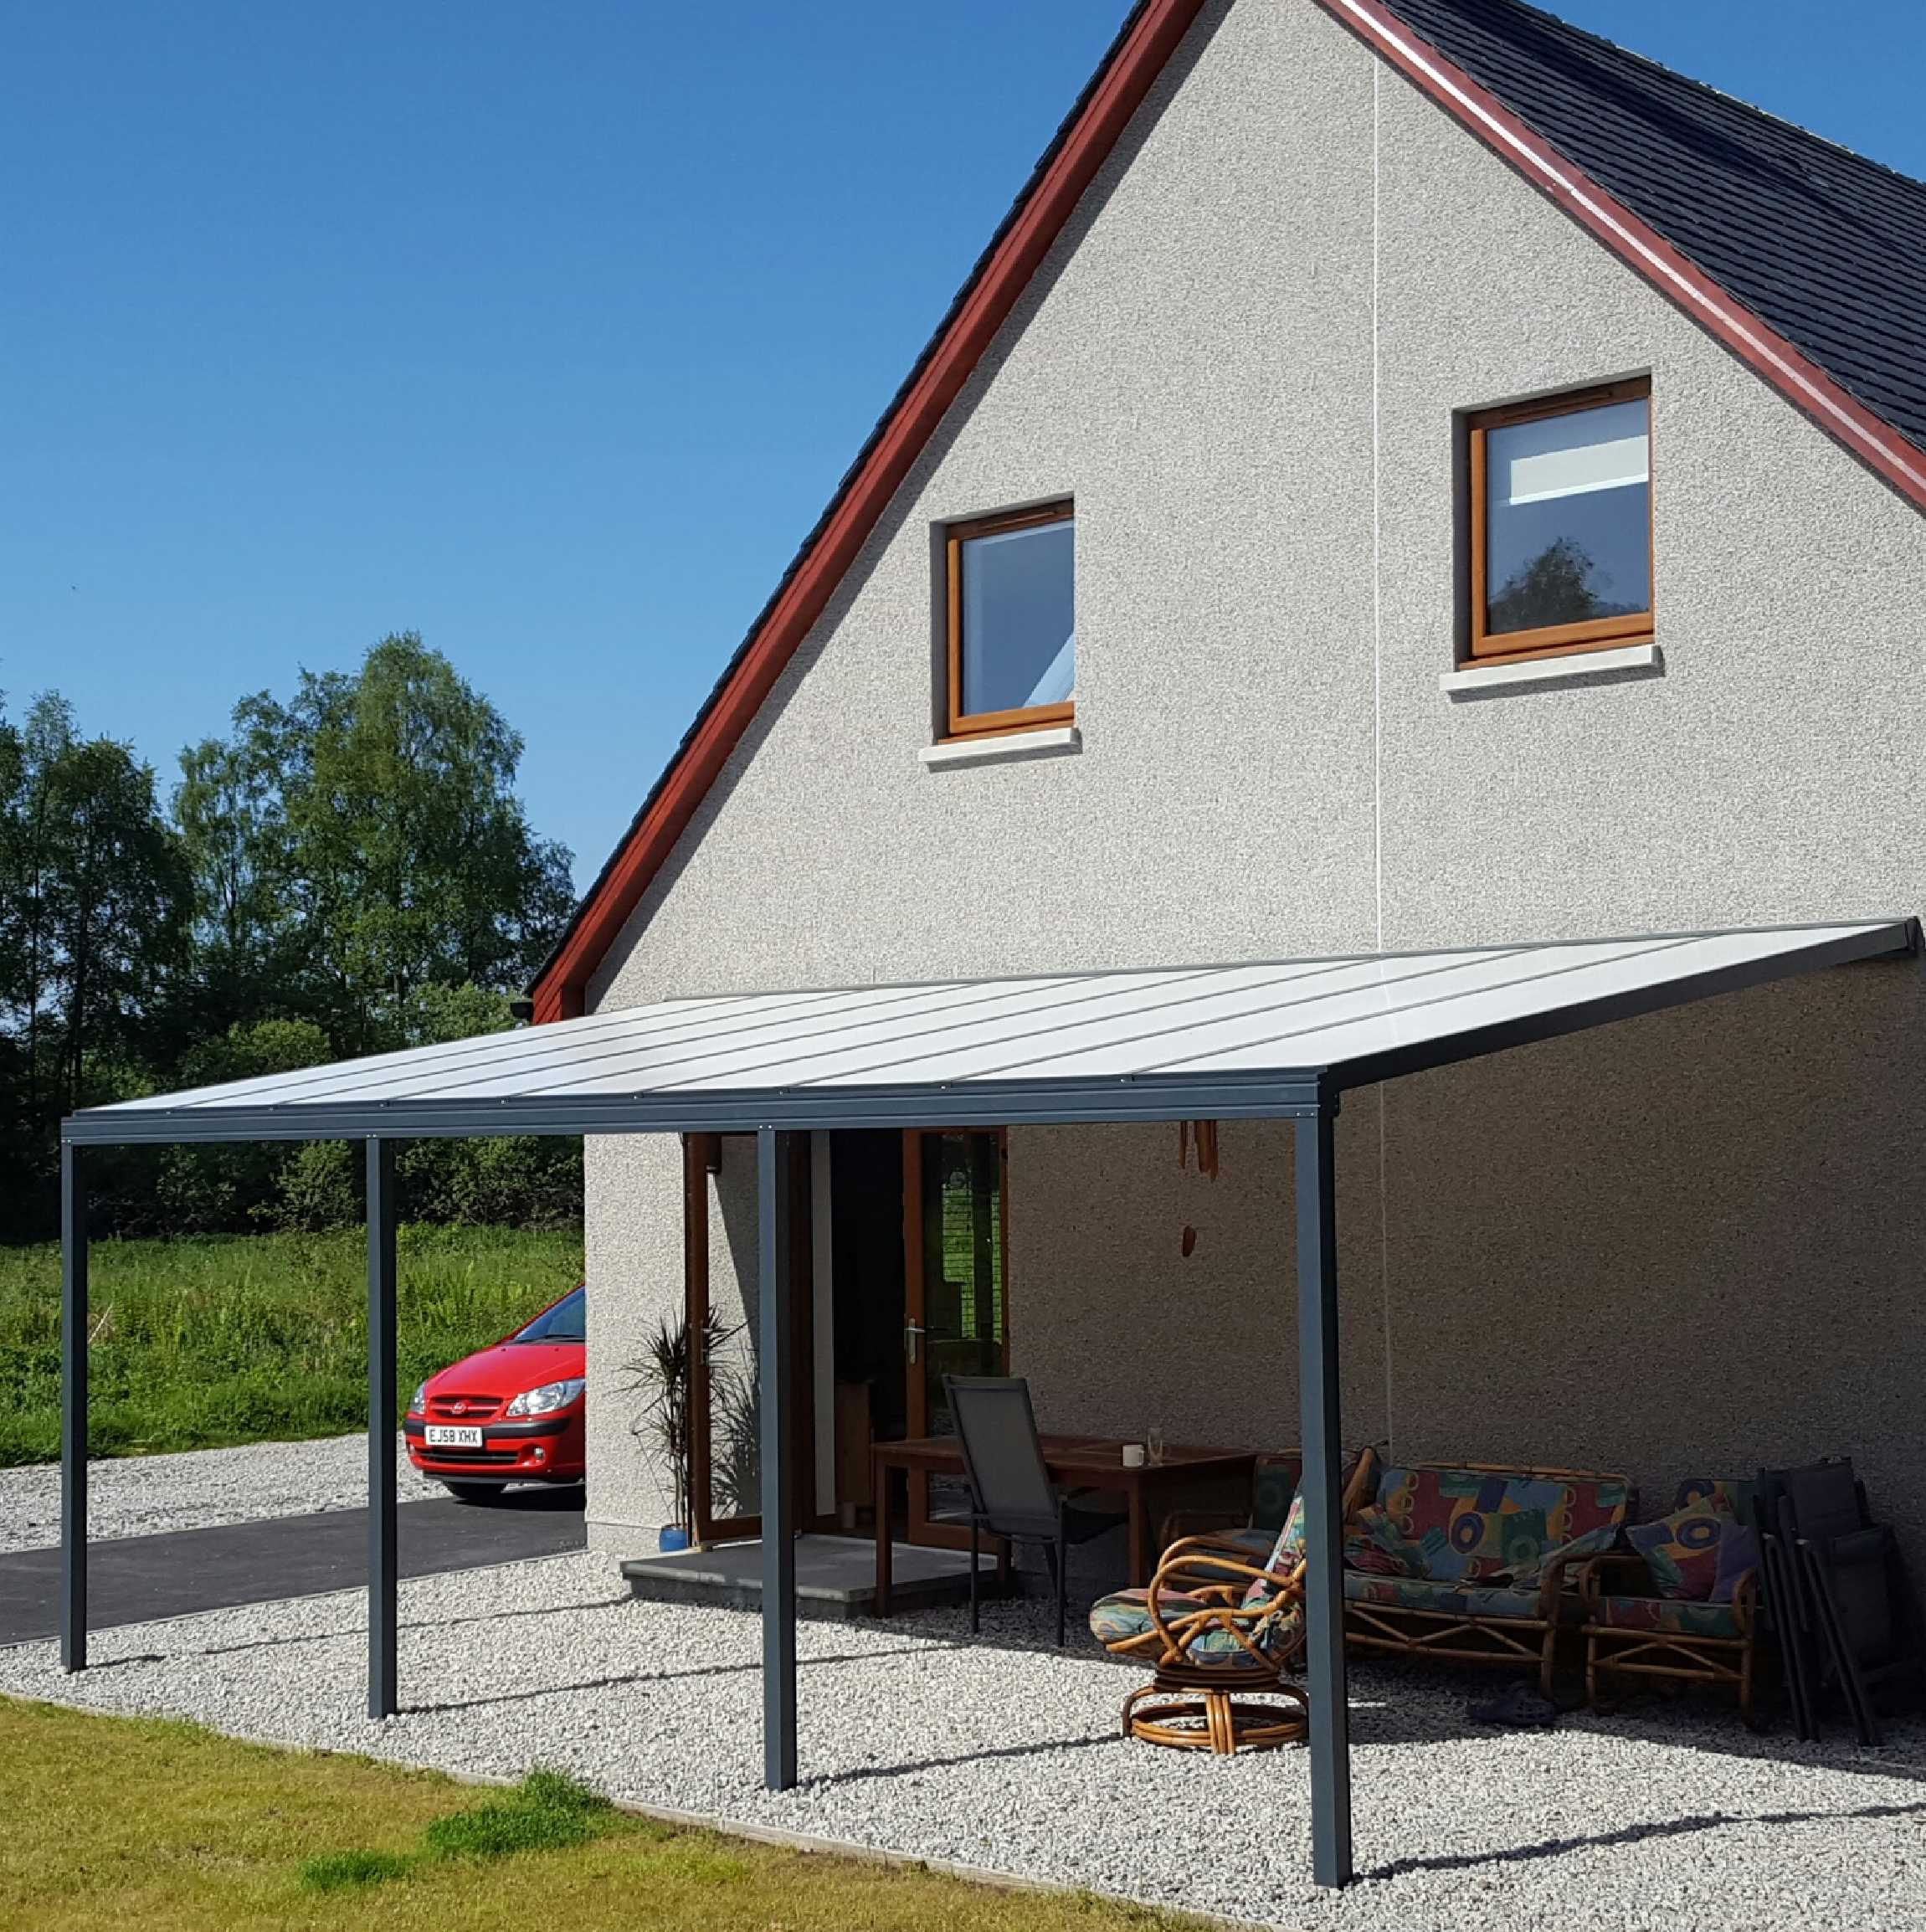 Great selection of Omega Smart Lean-To Canopy, Anthracite Grey, 16mm Polycarbonate Glazing - 11.2m (W) x 4.5m (P), (5) Supporting Posts